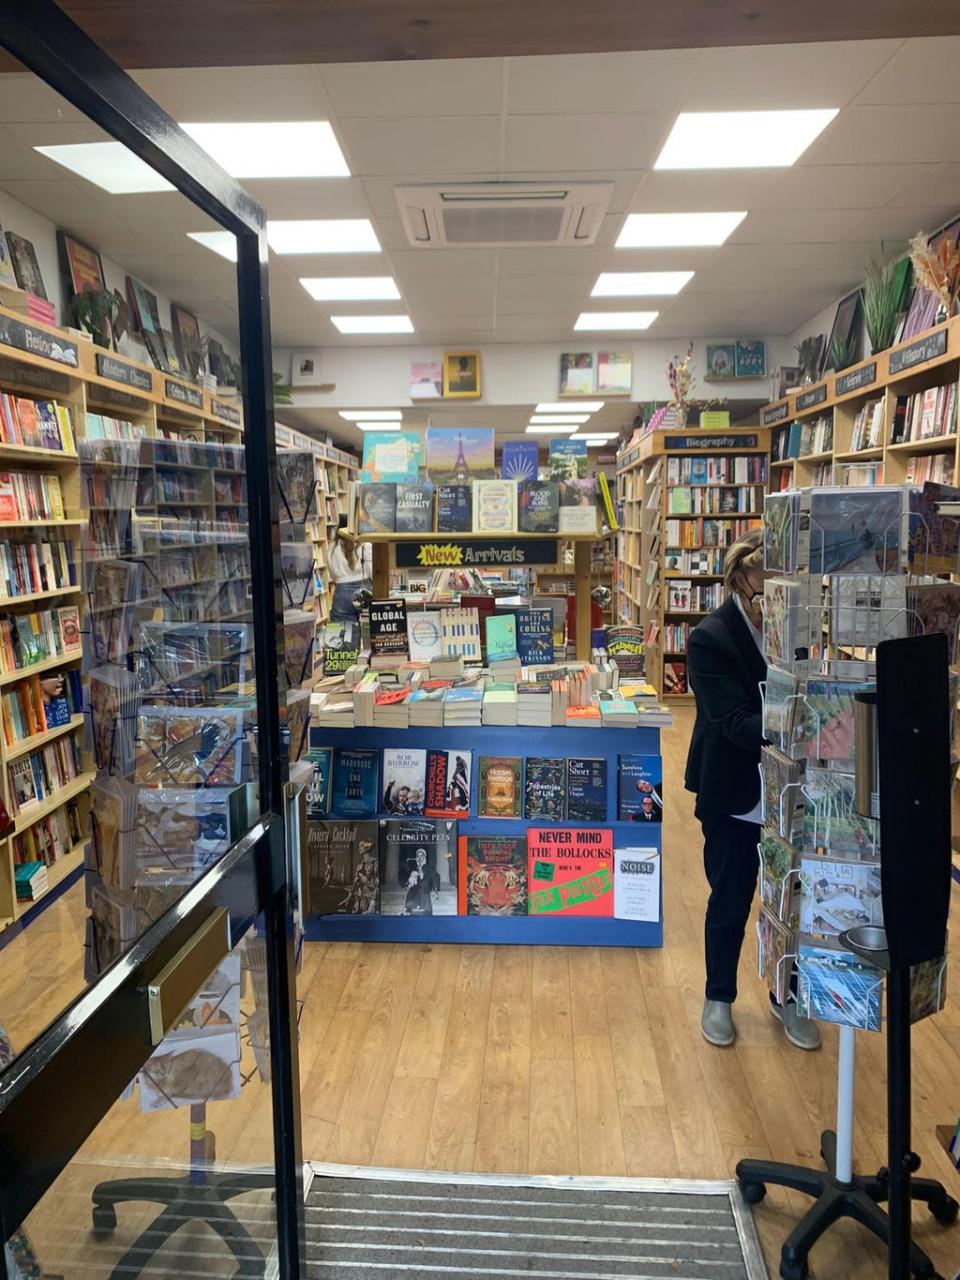 One of the businesses seeing people come in to spend vouchers is independent bookshop Bookcase, which has been in operation in Chiswick since 1993  (Bookcase)